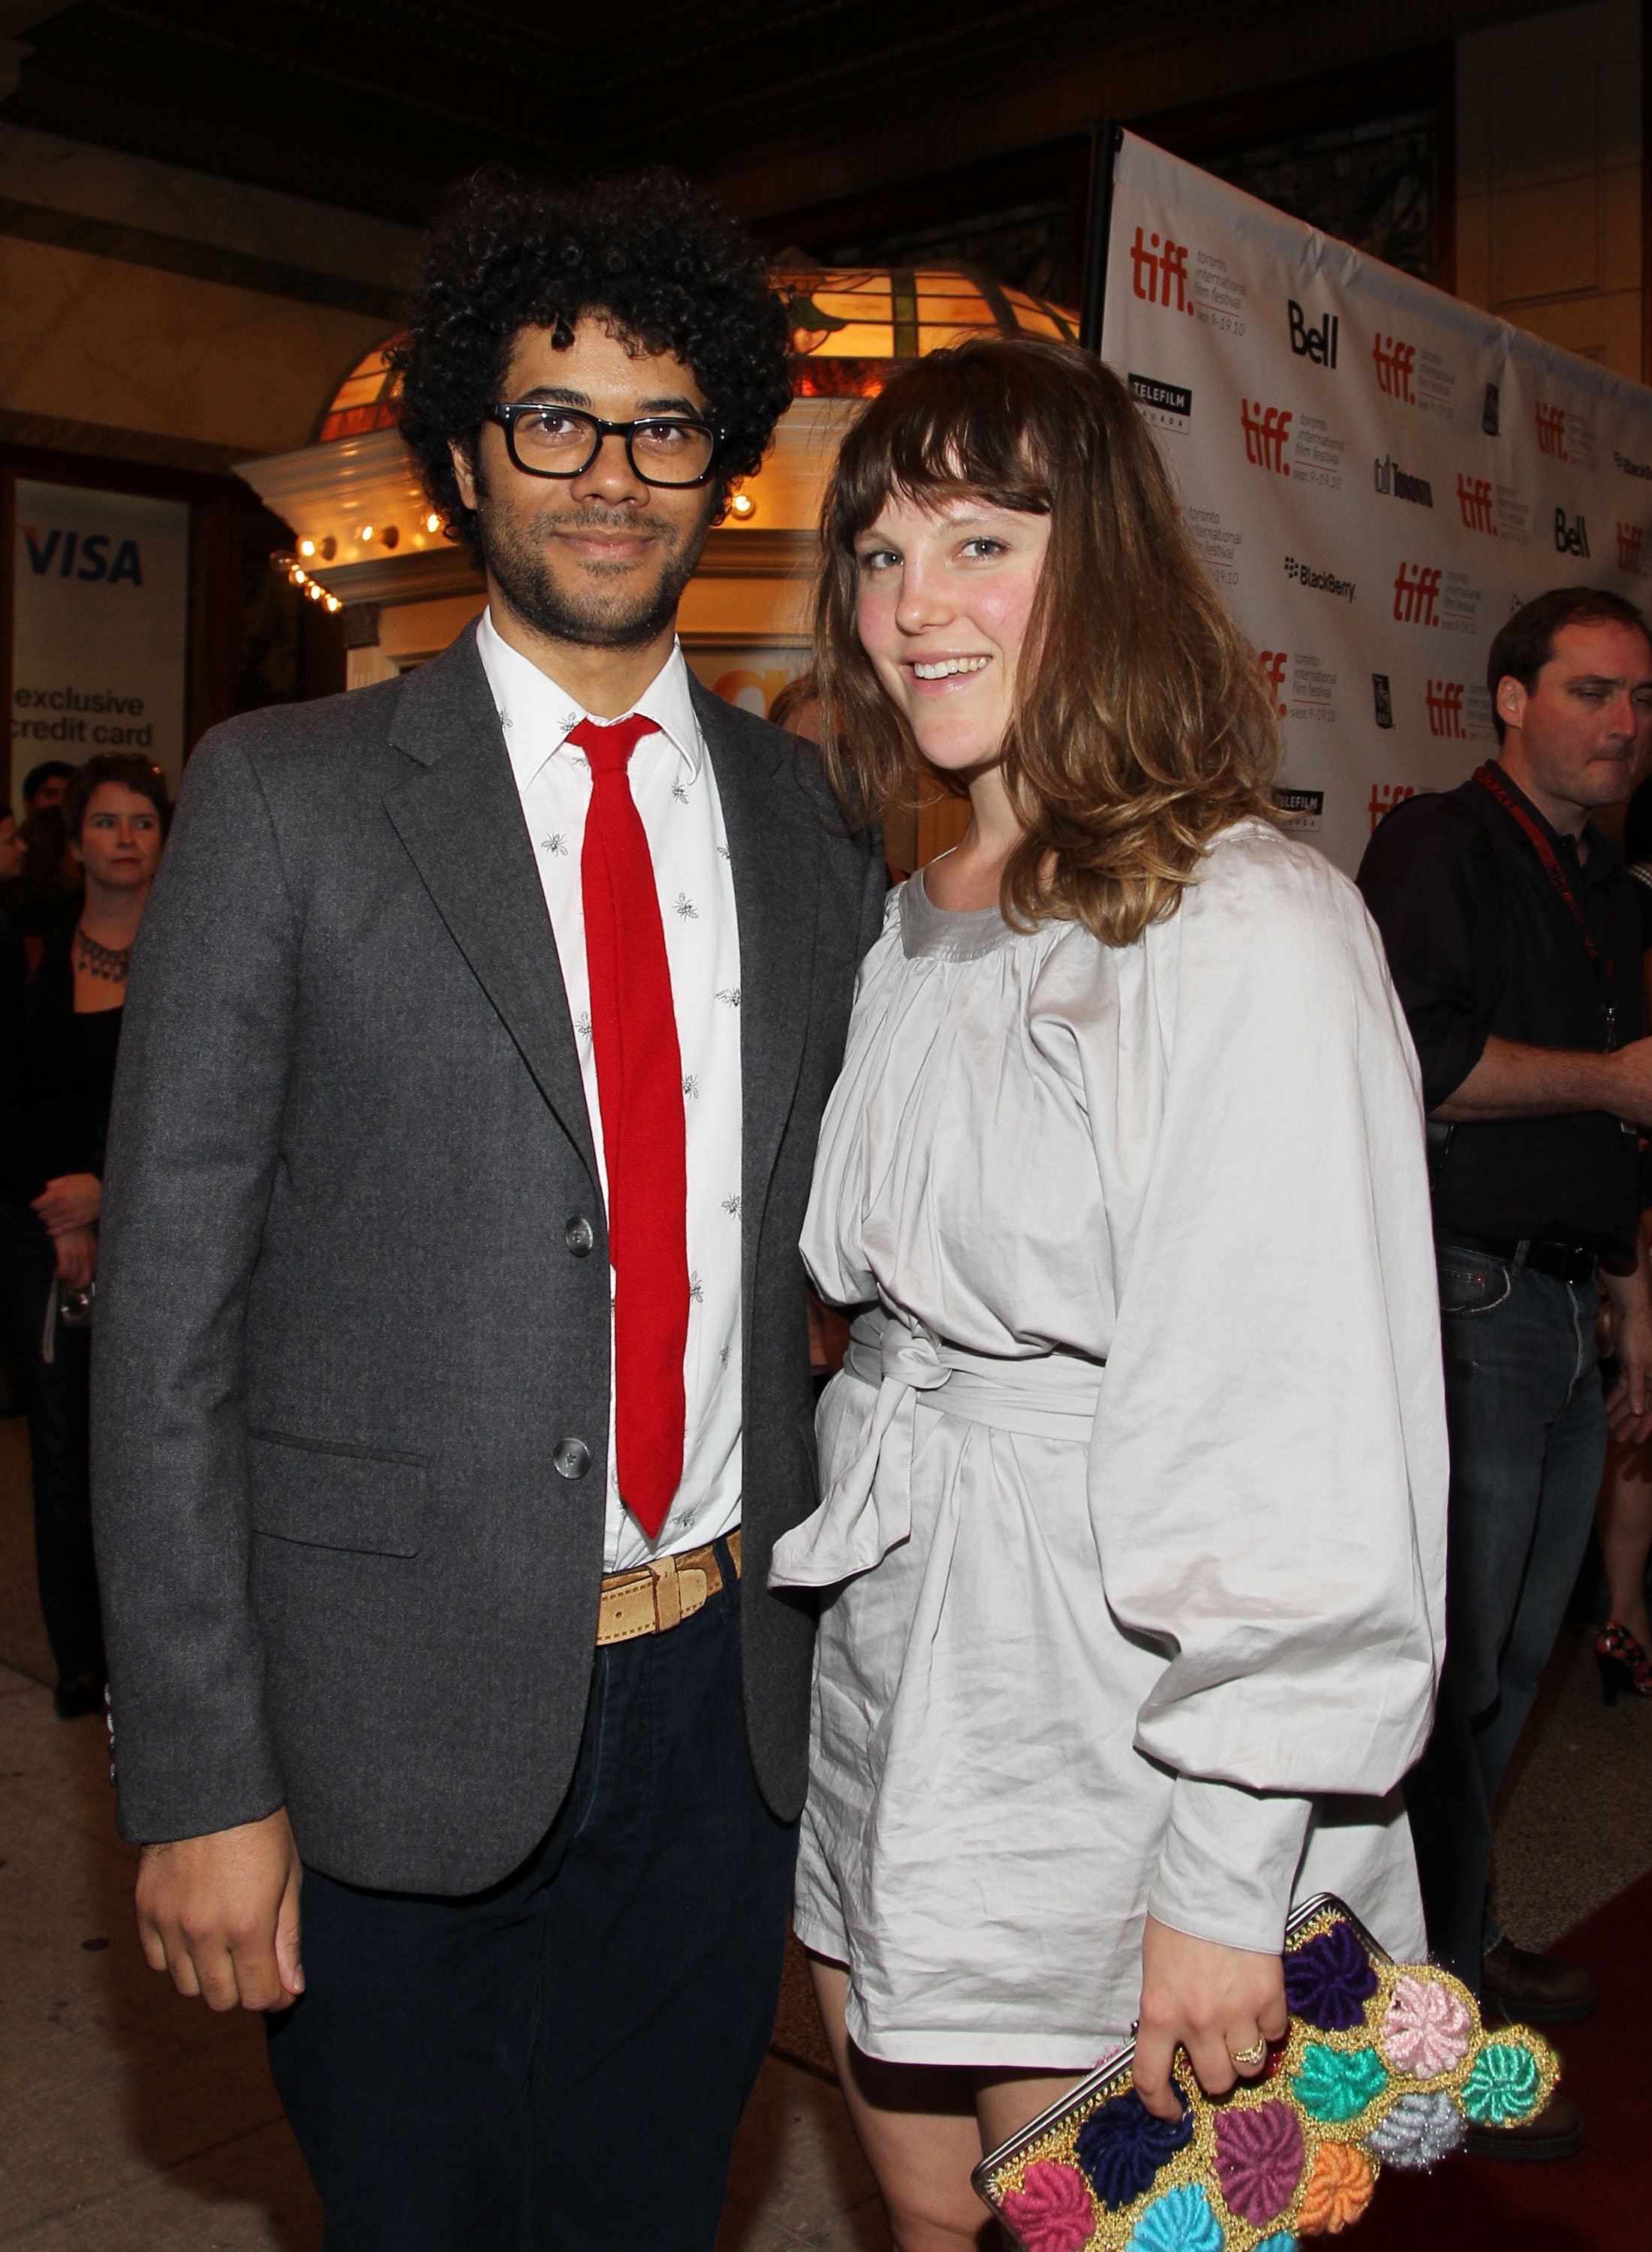 Lydia Fox and Richard Ayoade at the premiere of "Submarine" on September 12, 2010, in Toronto, Canada | Source: Getty Images